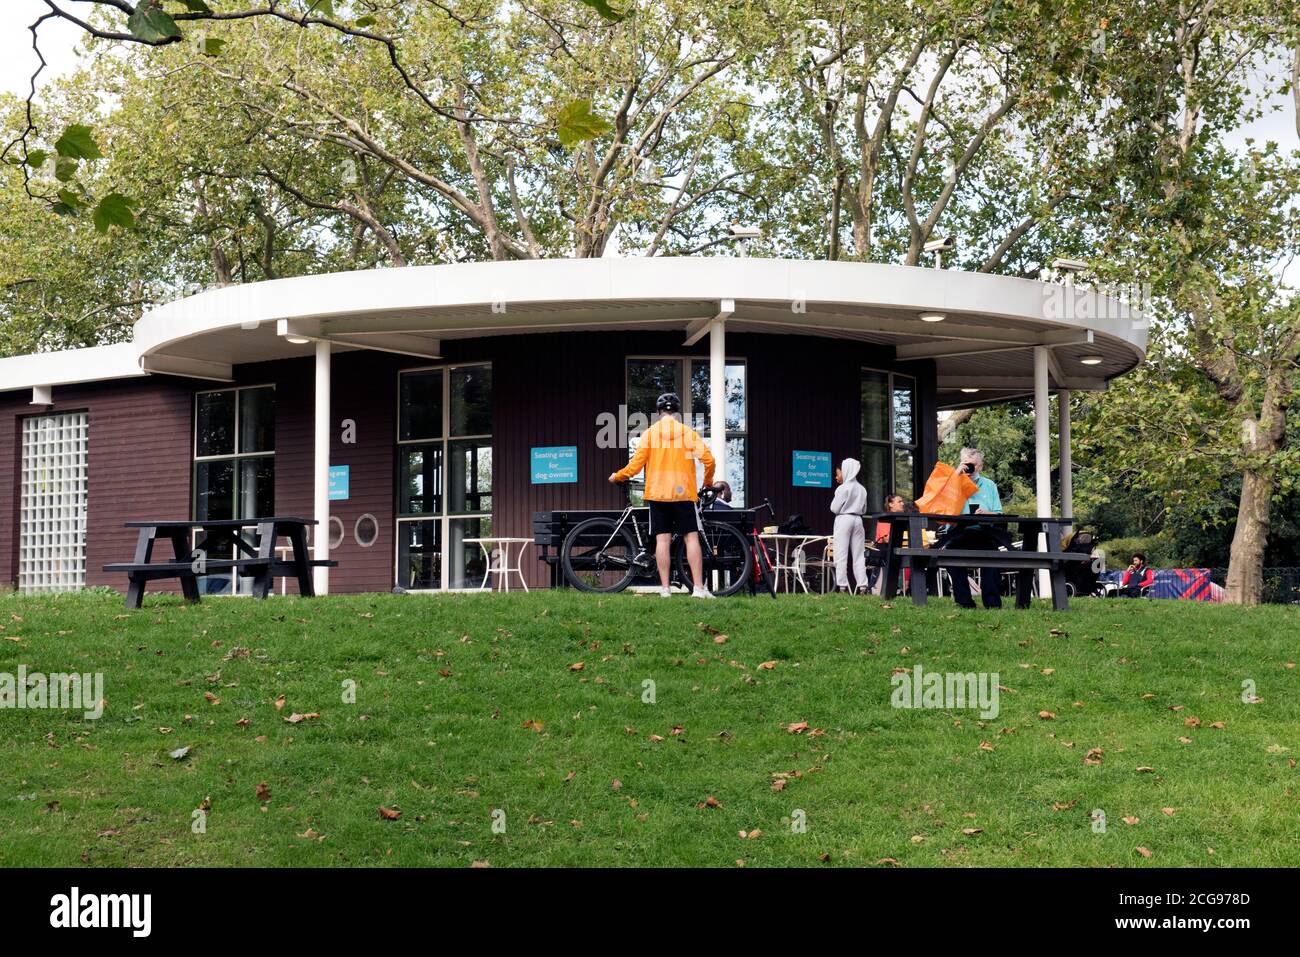 Café Finsbury Park with cyclist in orange jacket in front, London Borough of Harringey Stock Photo